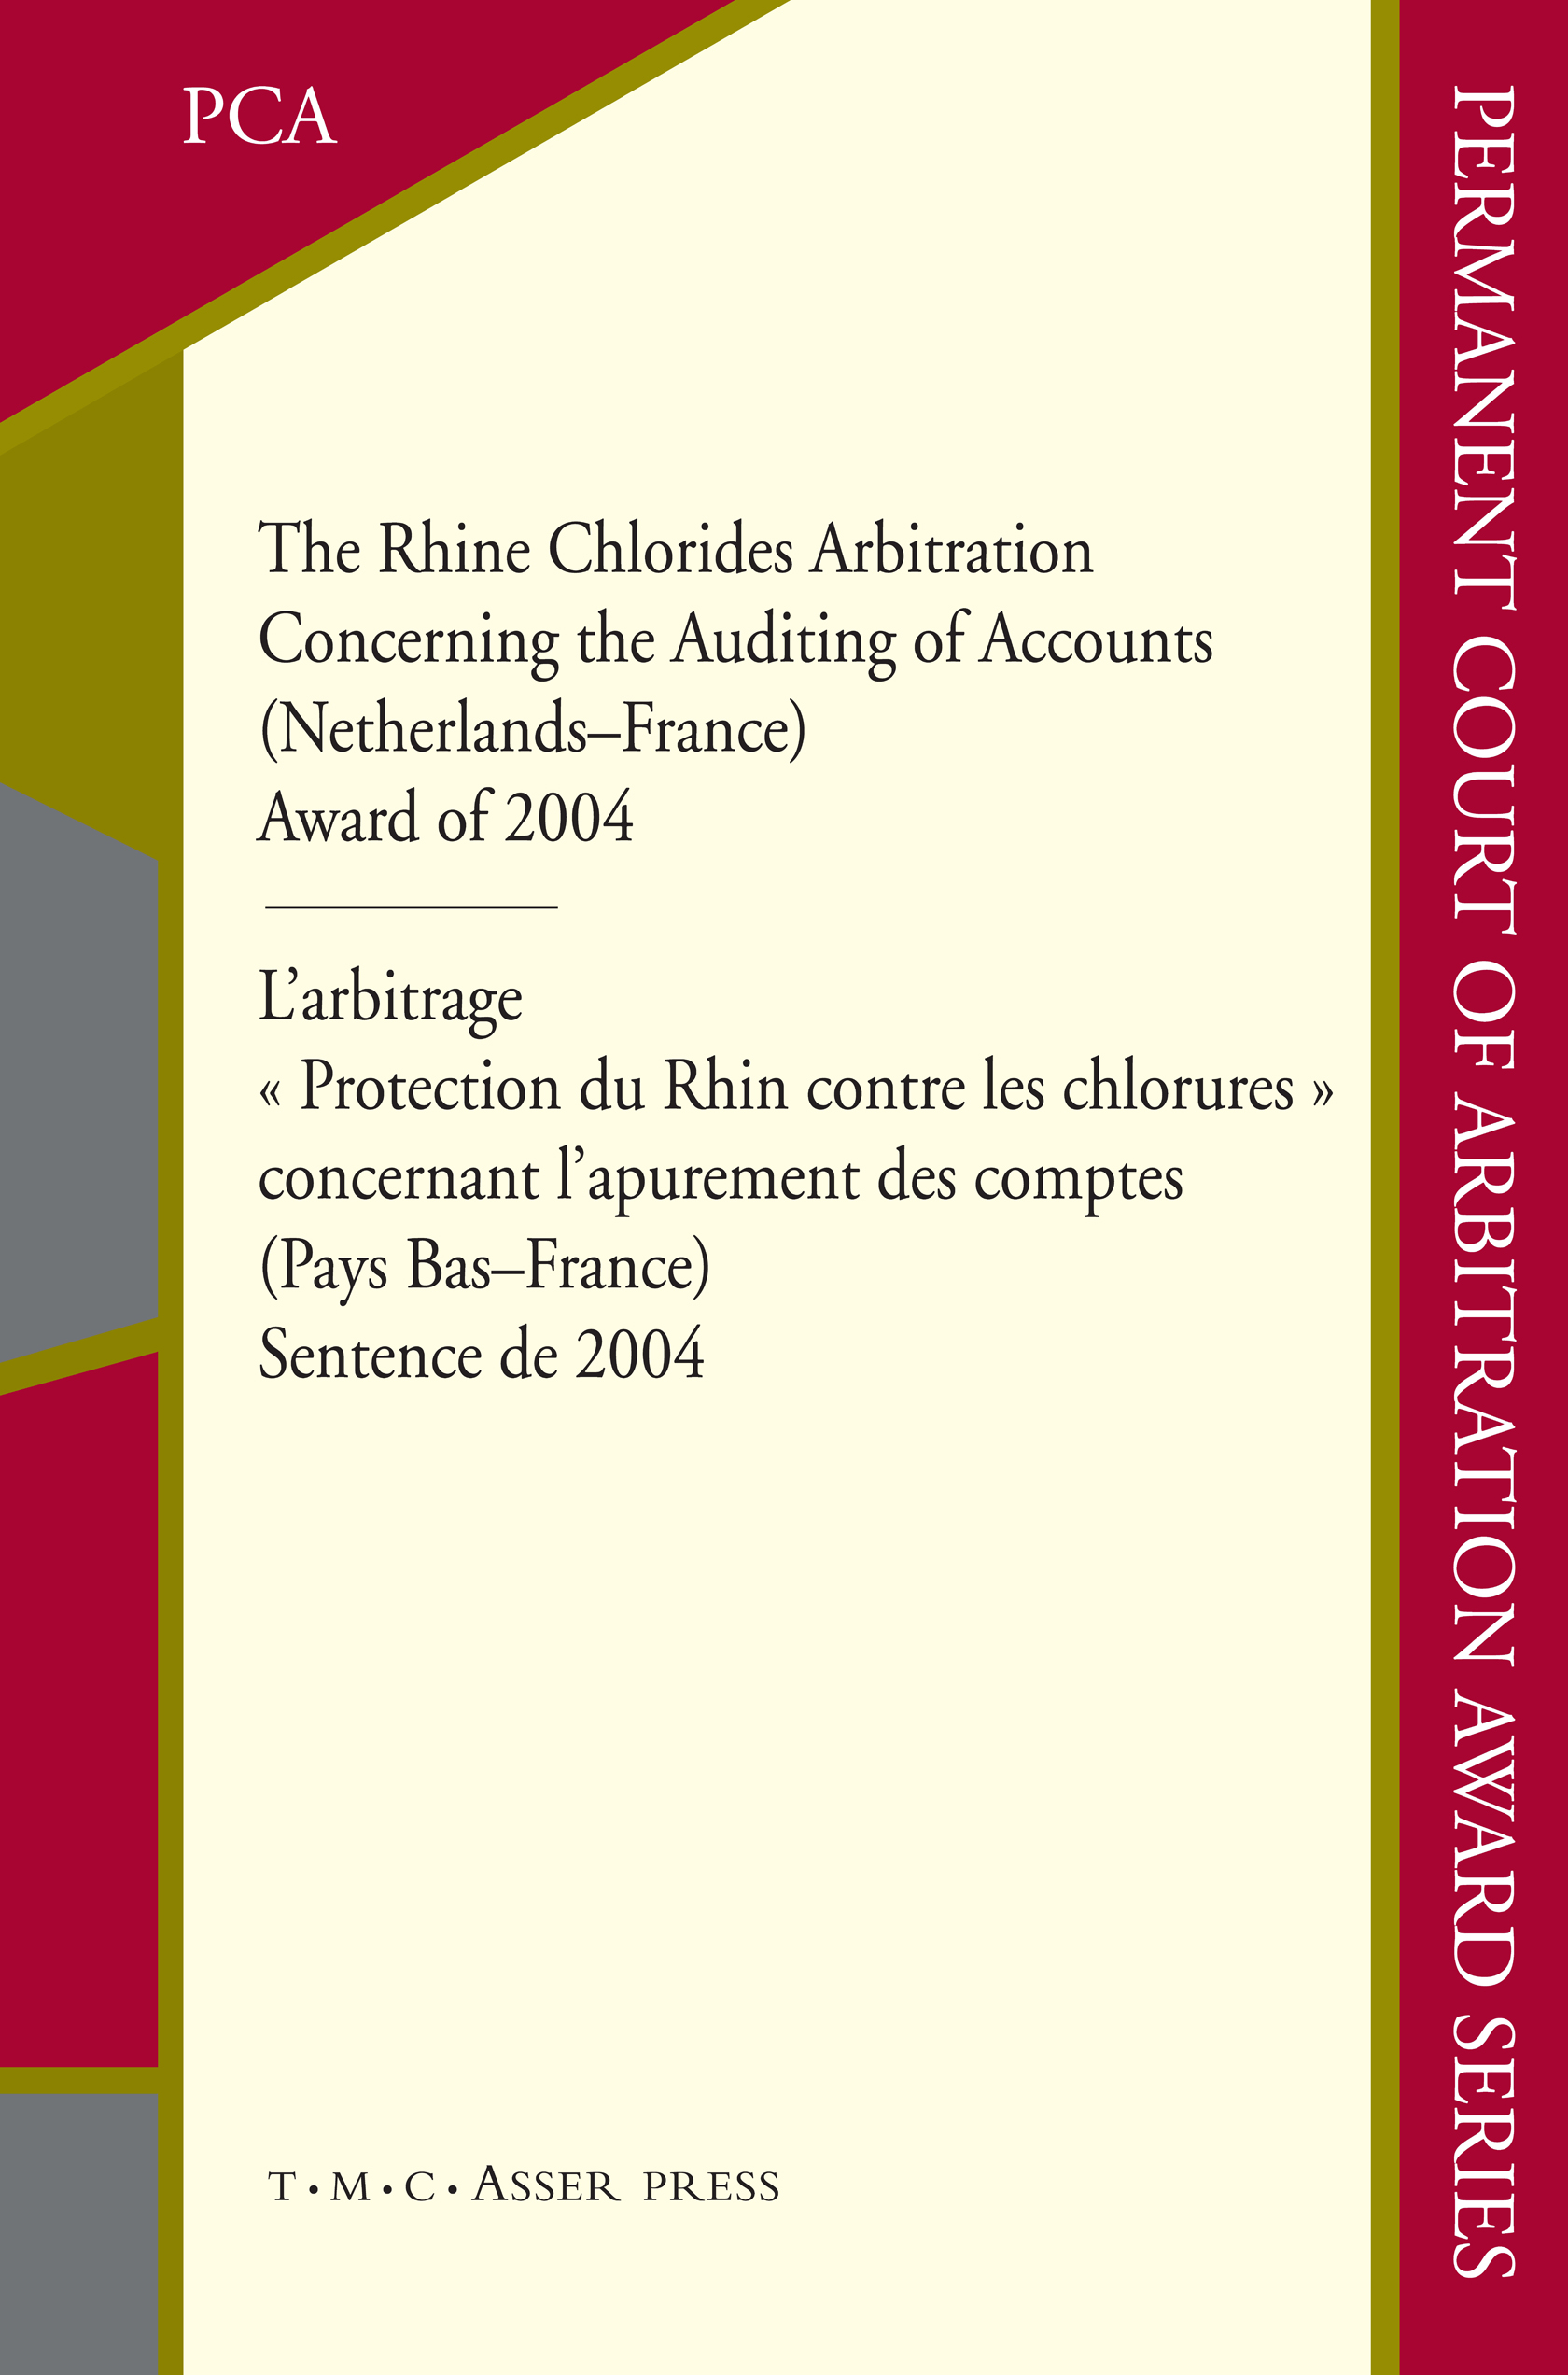 The Rhine Chlorides Arbitration Concerning the Auditing of Accounts (Netherlands–France) Award of 2004